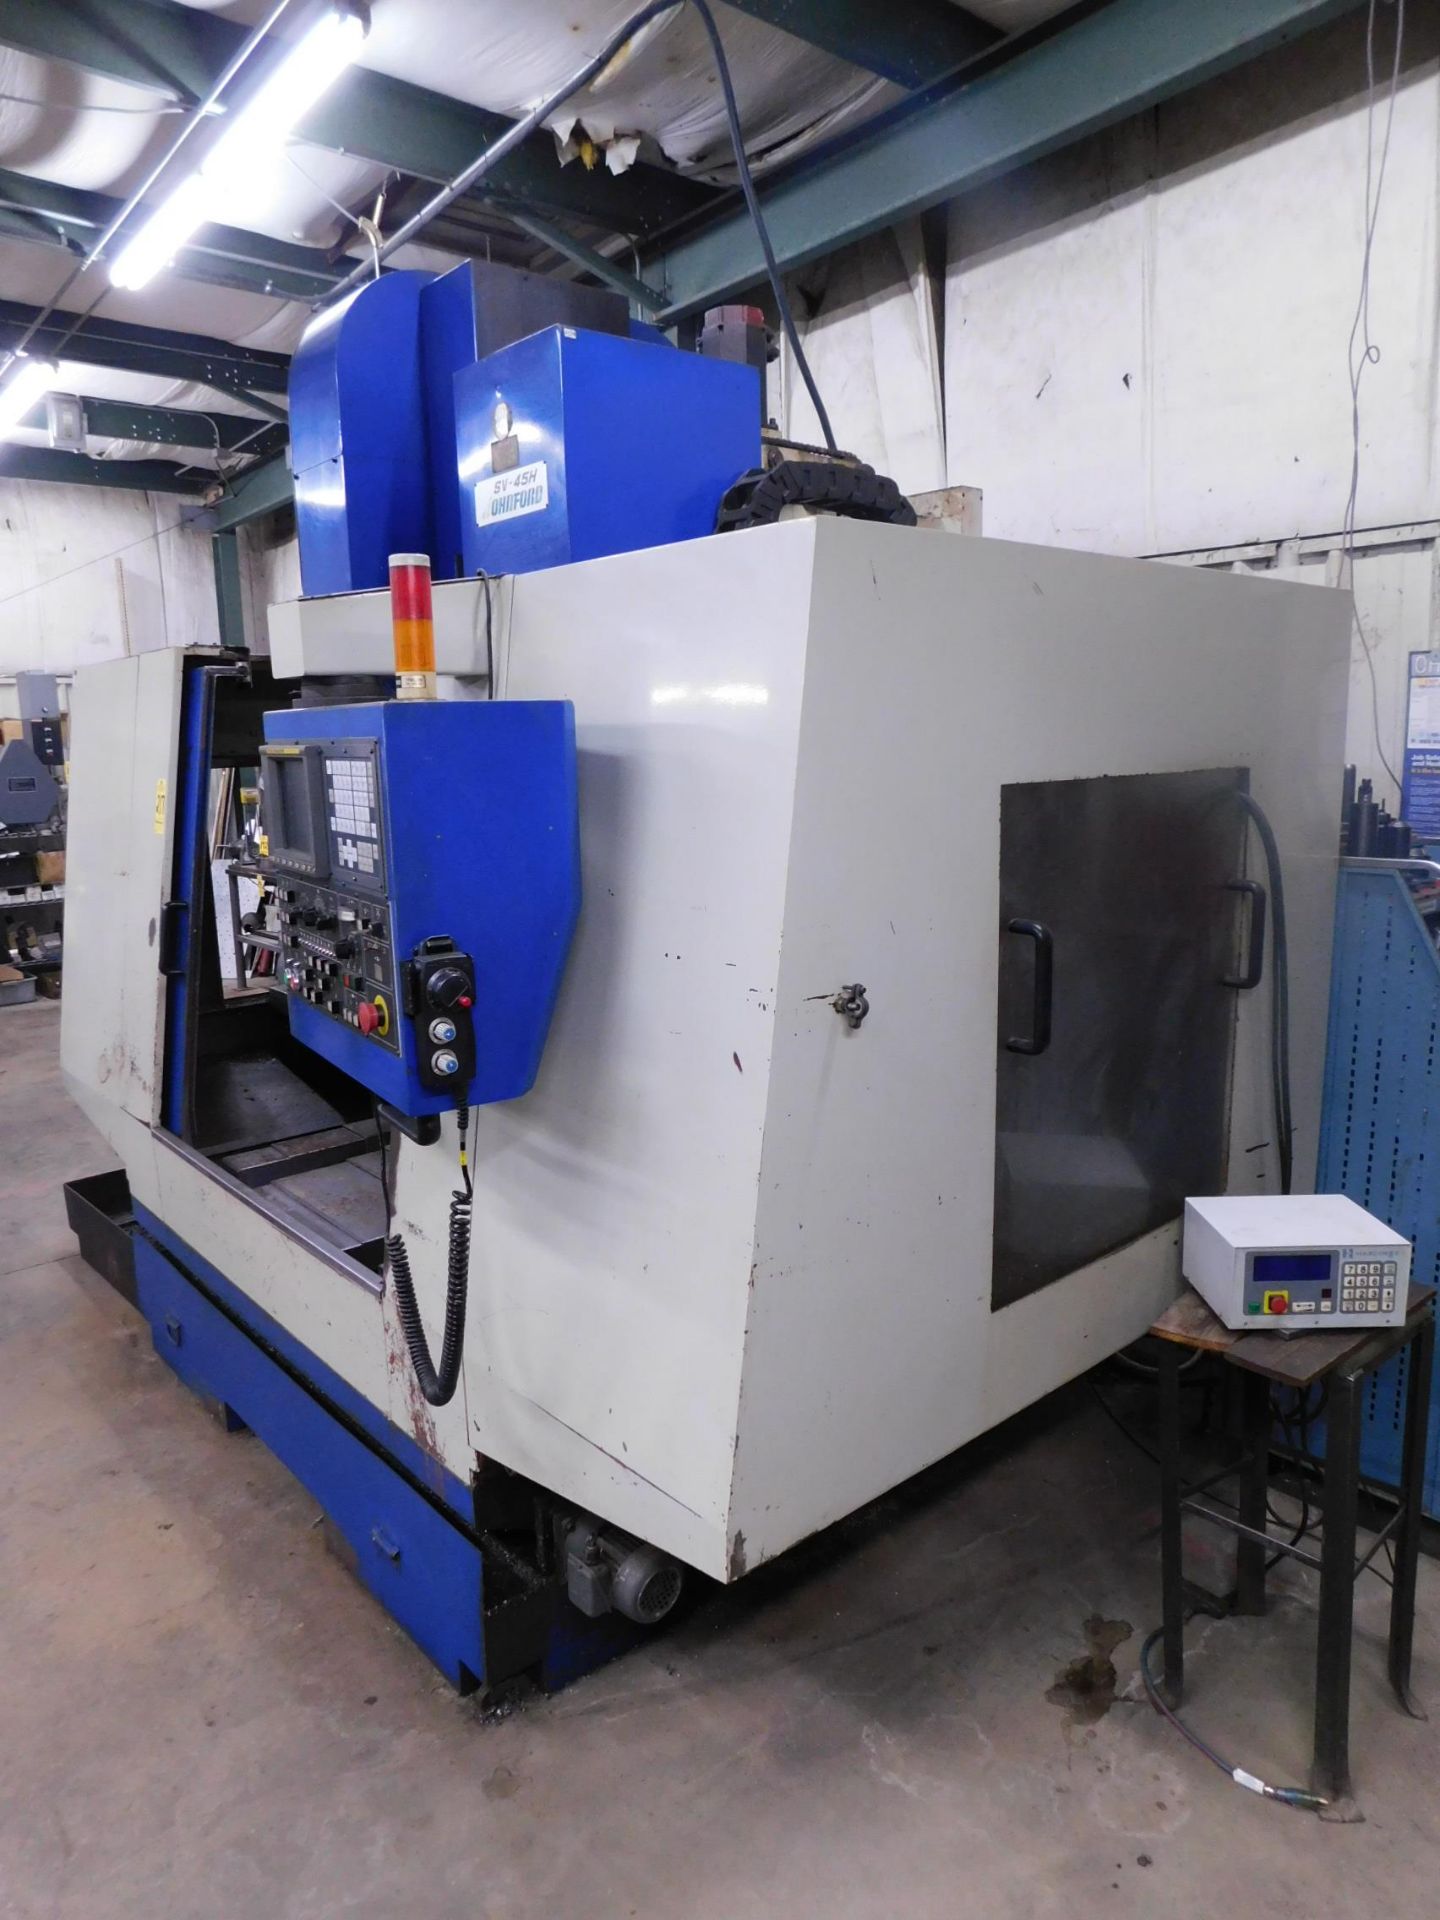 Johnford SV-45H CNC Vertical Machining Center, SN VU8123, New in 1998, 19.7" x 48" Table, Fanuc 18M - Image 3 of 16